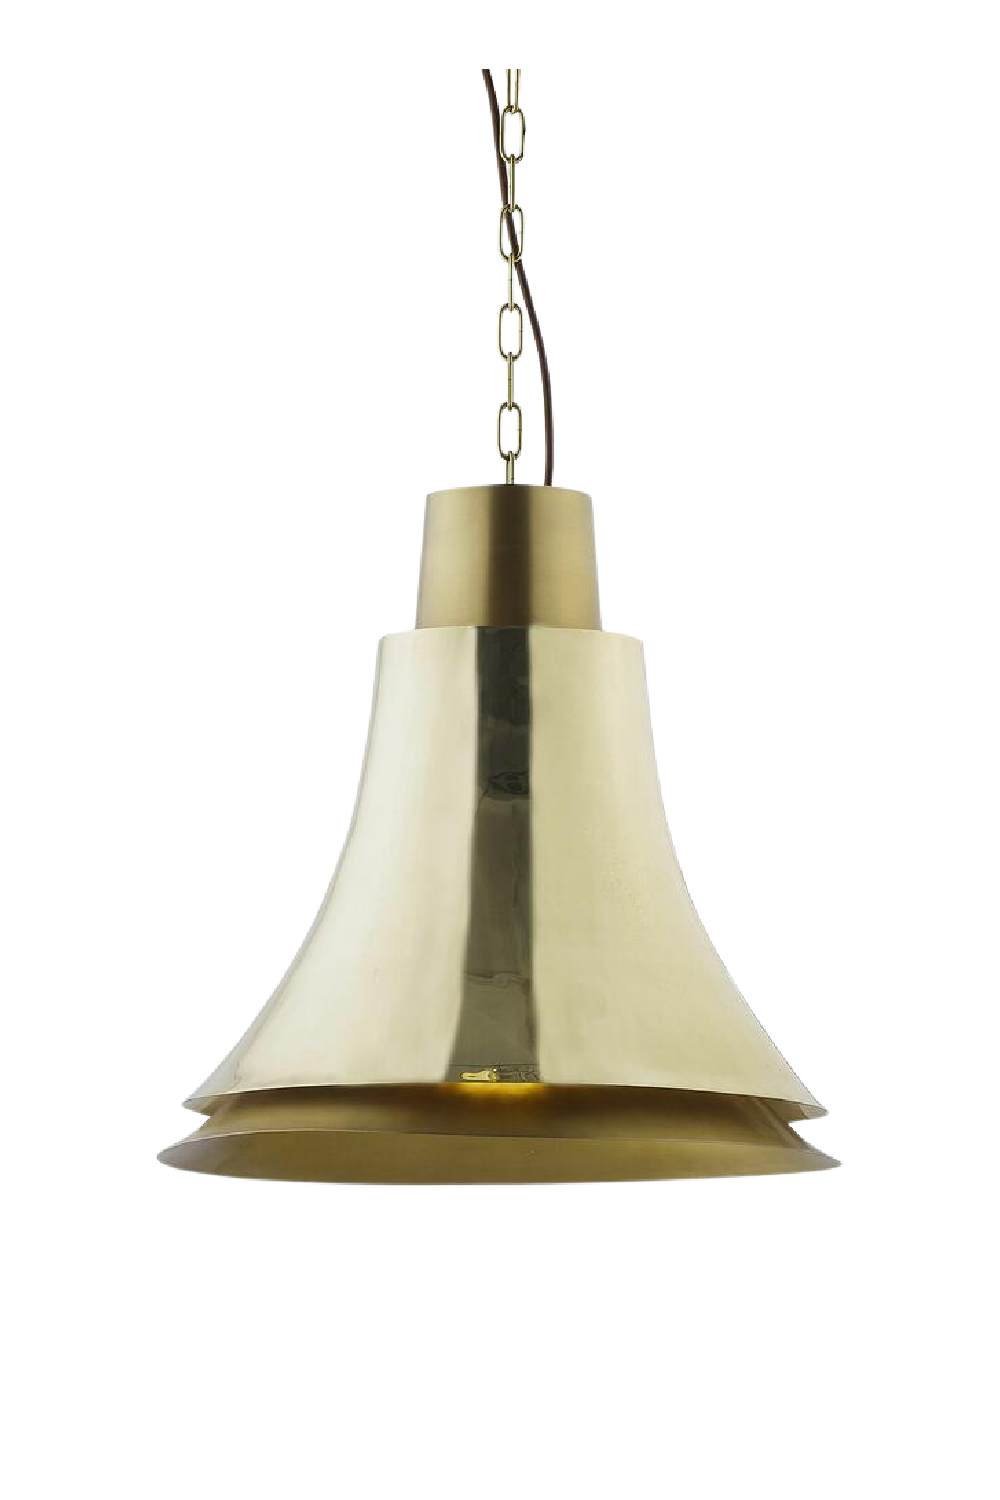 Polished Brass Conical Pendant Light | Andrew Martin Bell | Oroa.com